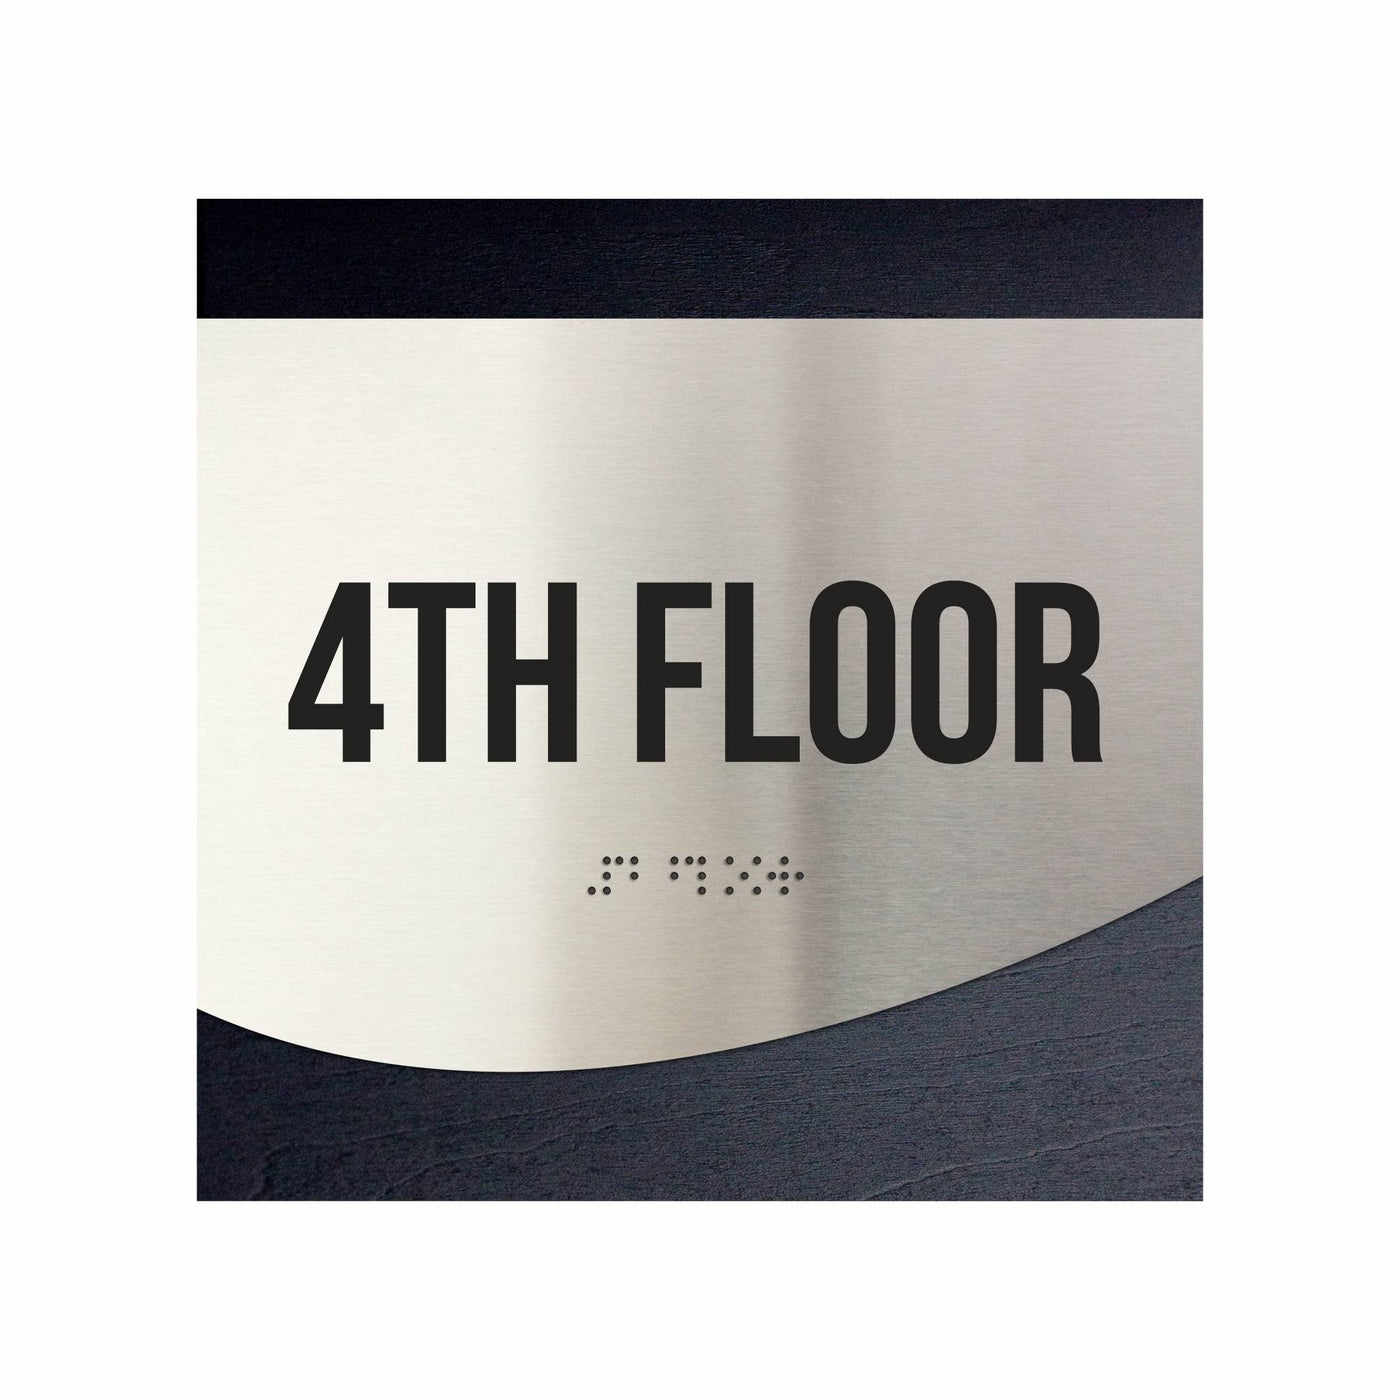 Floor Signs - Sign For 4th Floor - Stainless Steel & Wood  - "Jure" Design